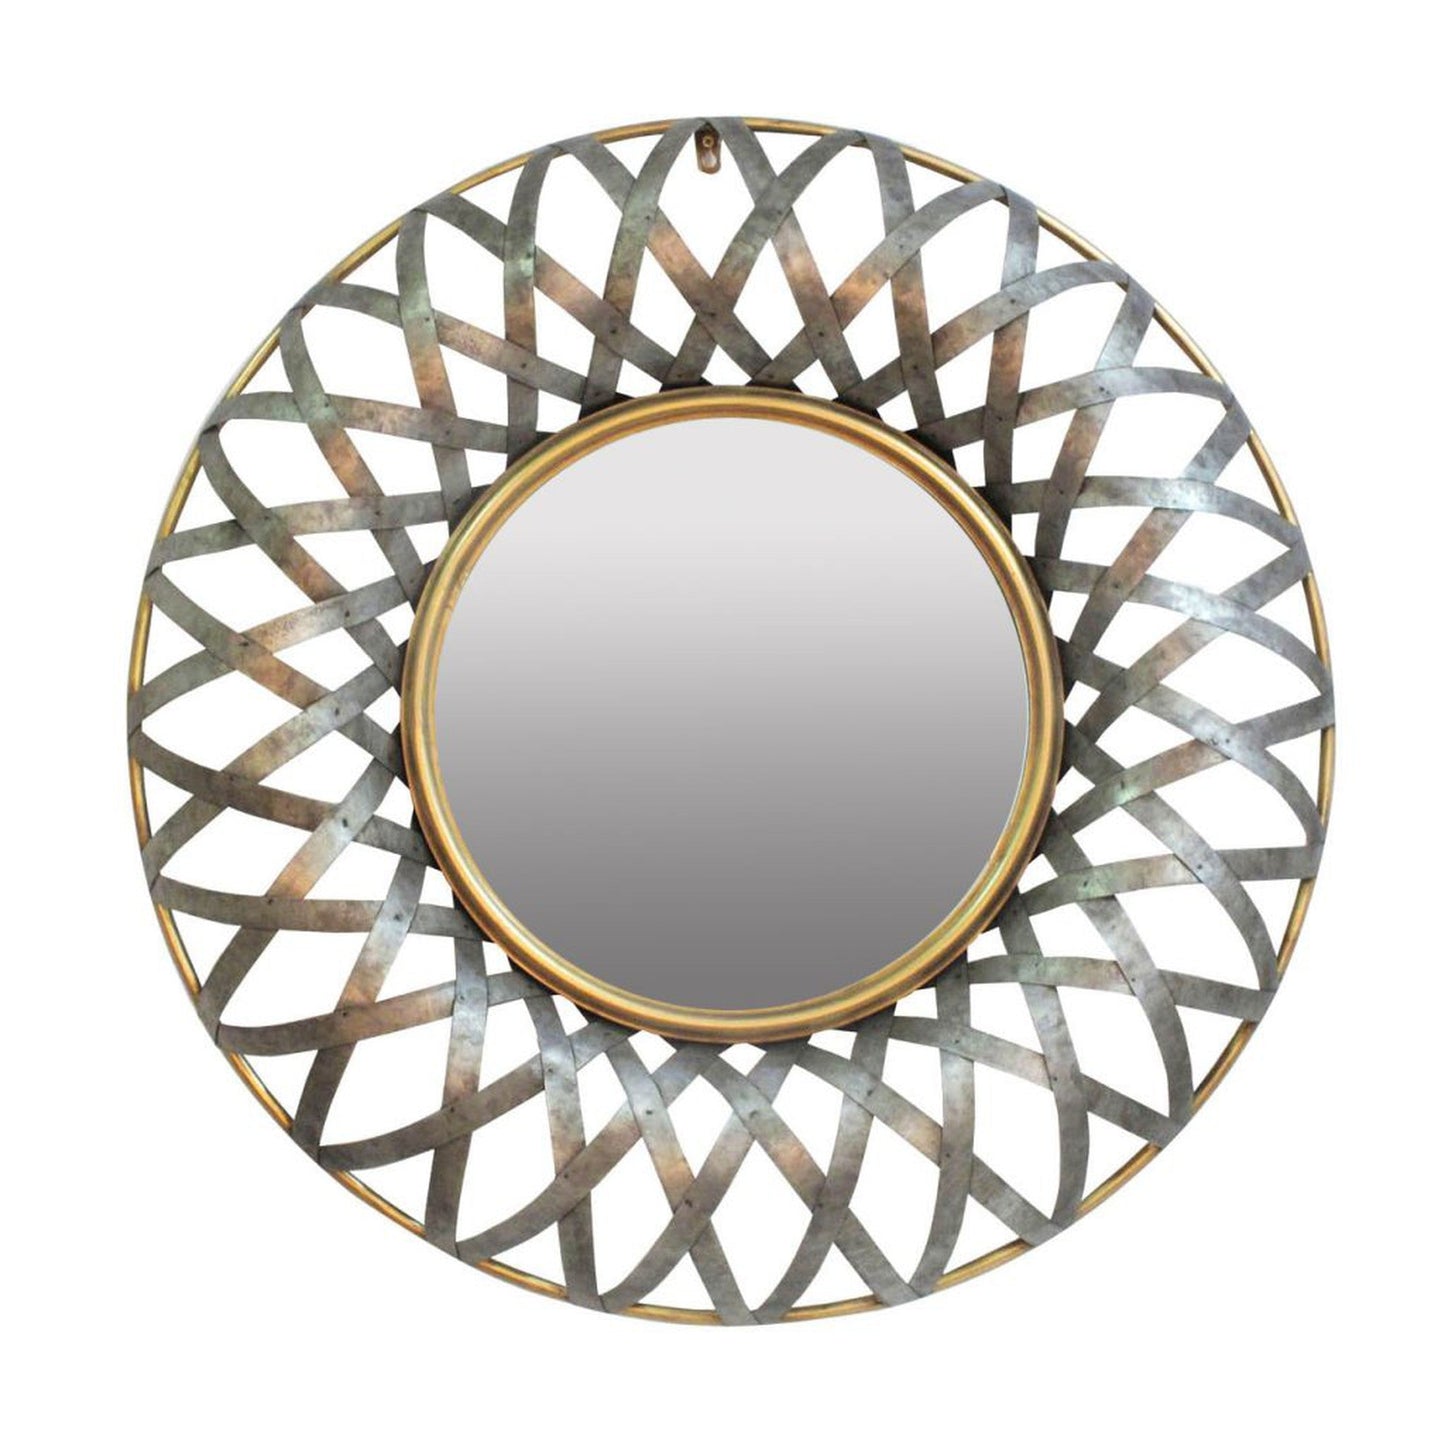 A&B Home Ives 30" x 30" Bundle of 18 Round Antique Silver With Gold Tone Woven Pattern Metal Framed Wall-Mounted Mirror